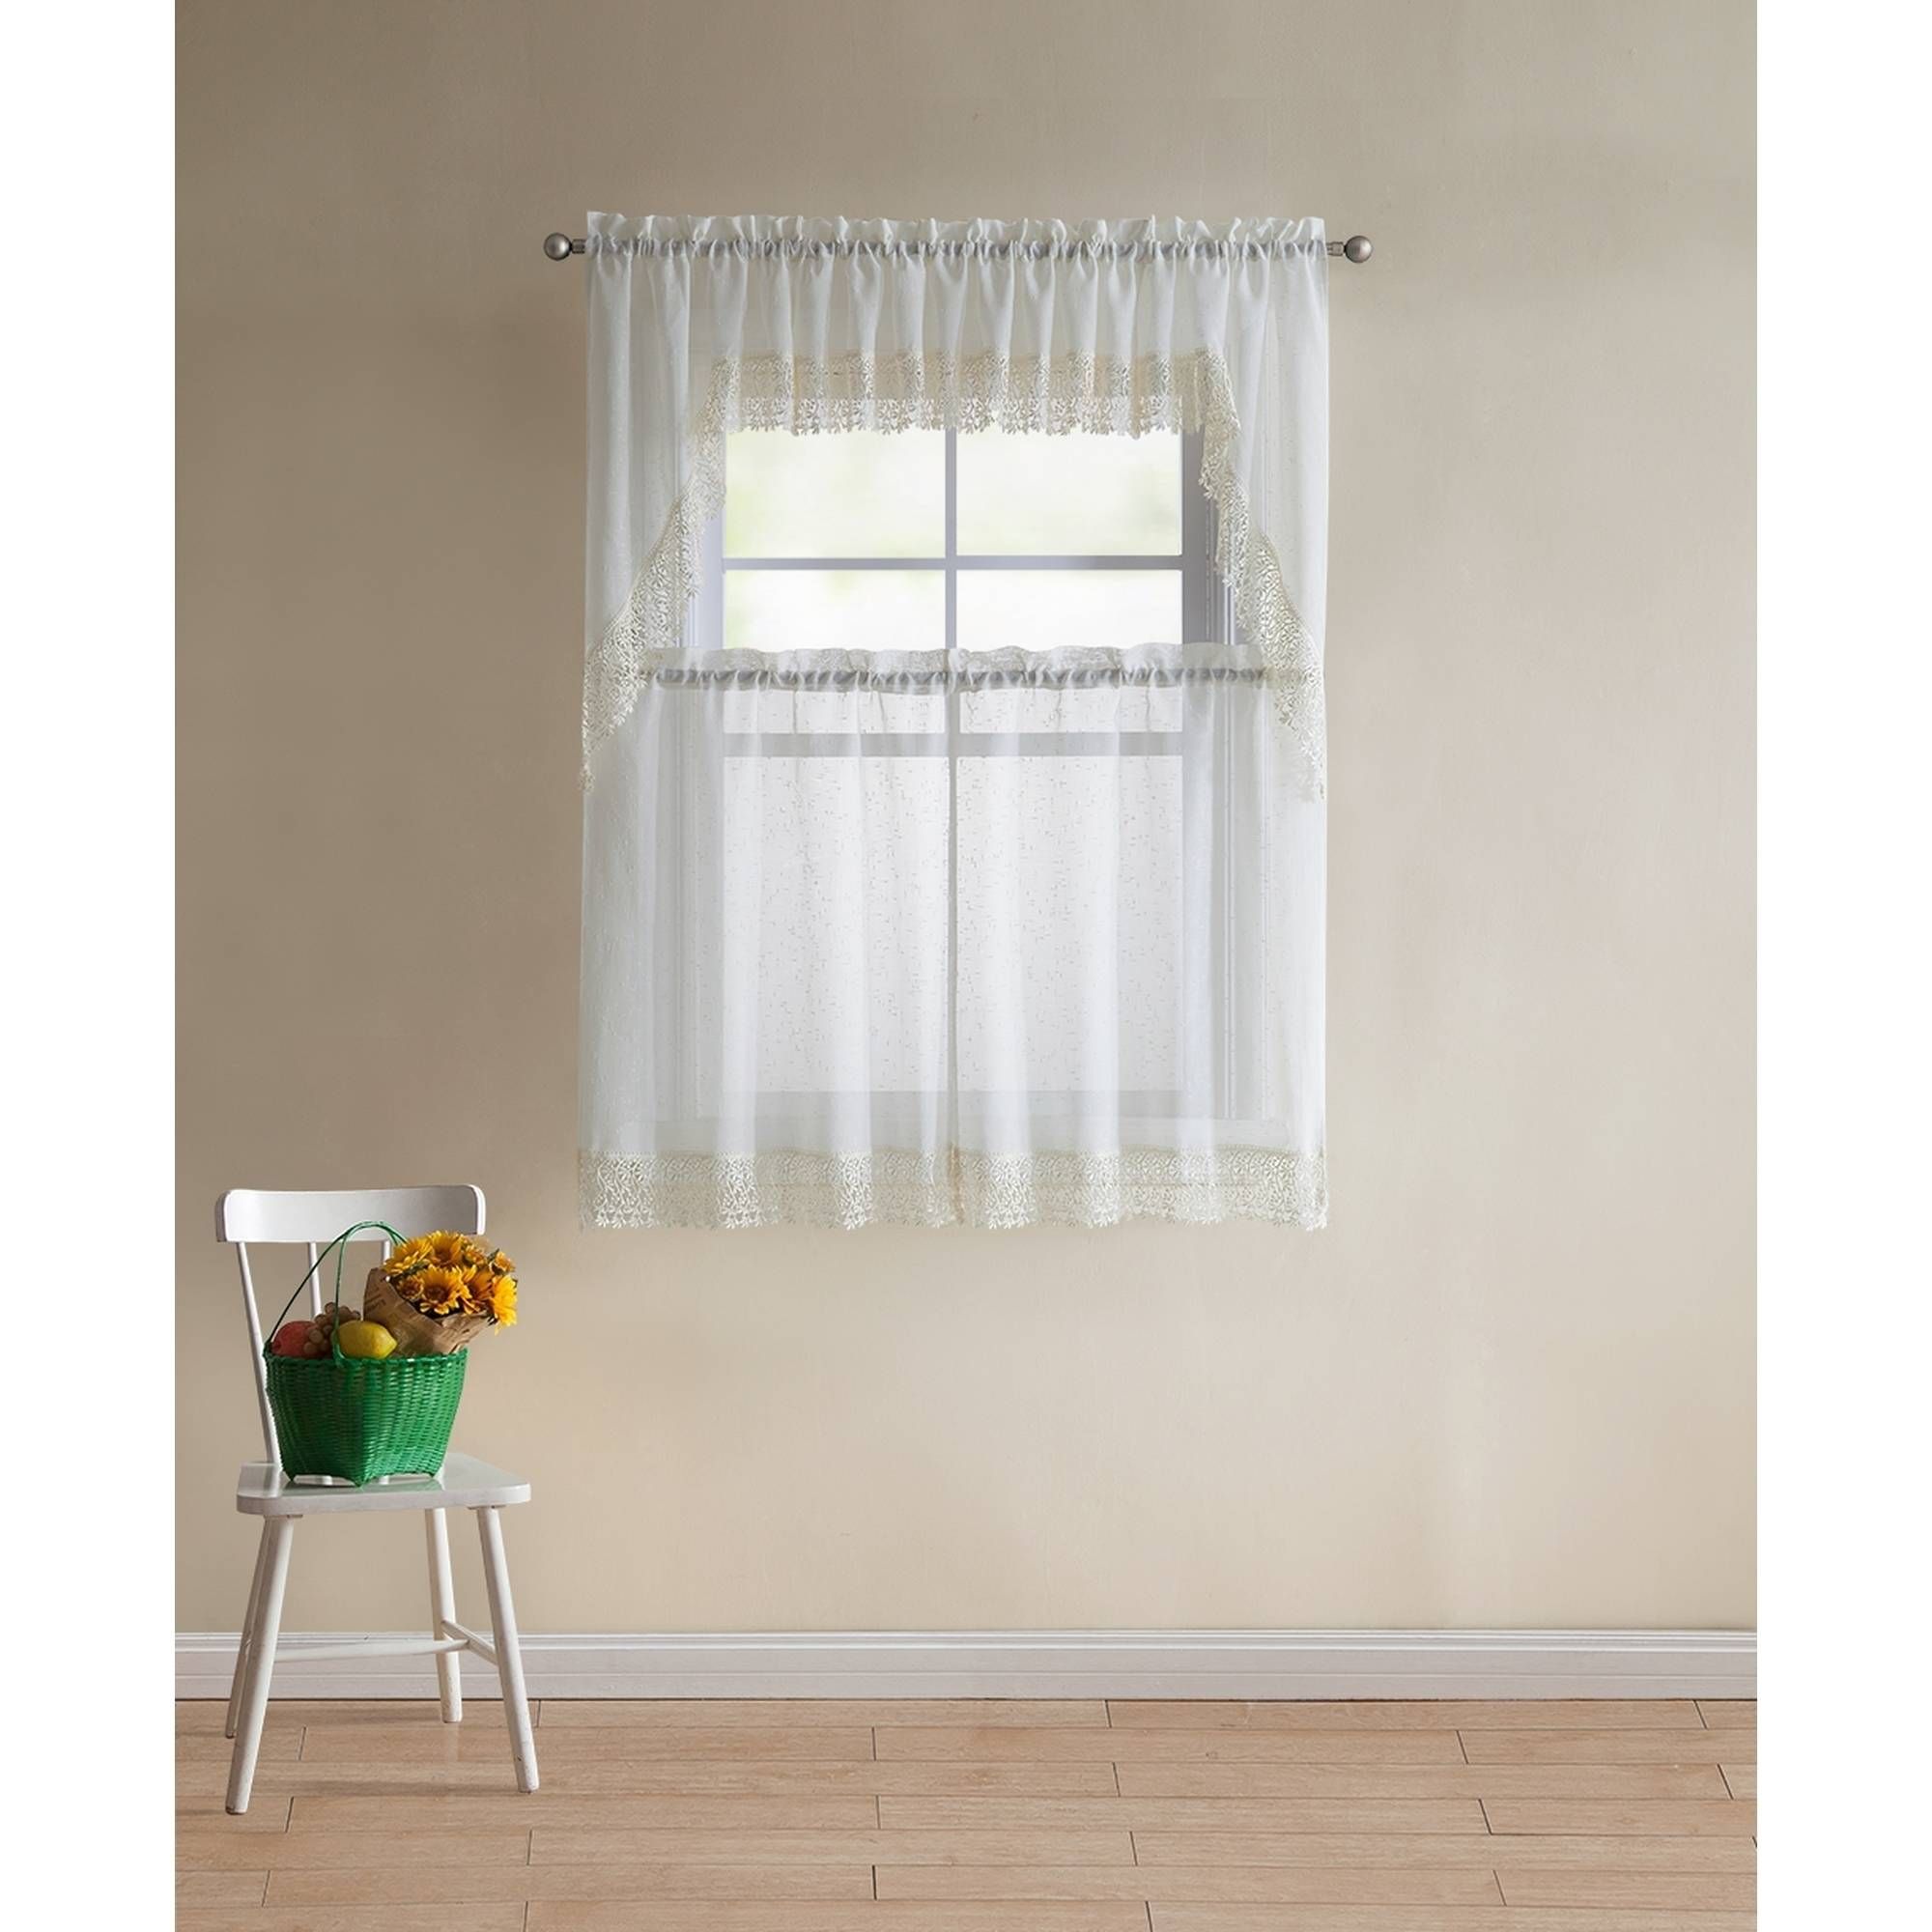 Better Homes & Gardens Lace Vines Kitchen Curtain Tiers And Pertaining To Floral Lace Rod Pocket Kitchen Curtain Valance And Tiers Sets (View 20 of 20)